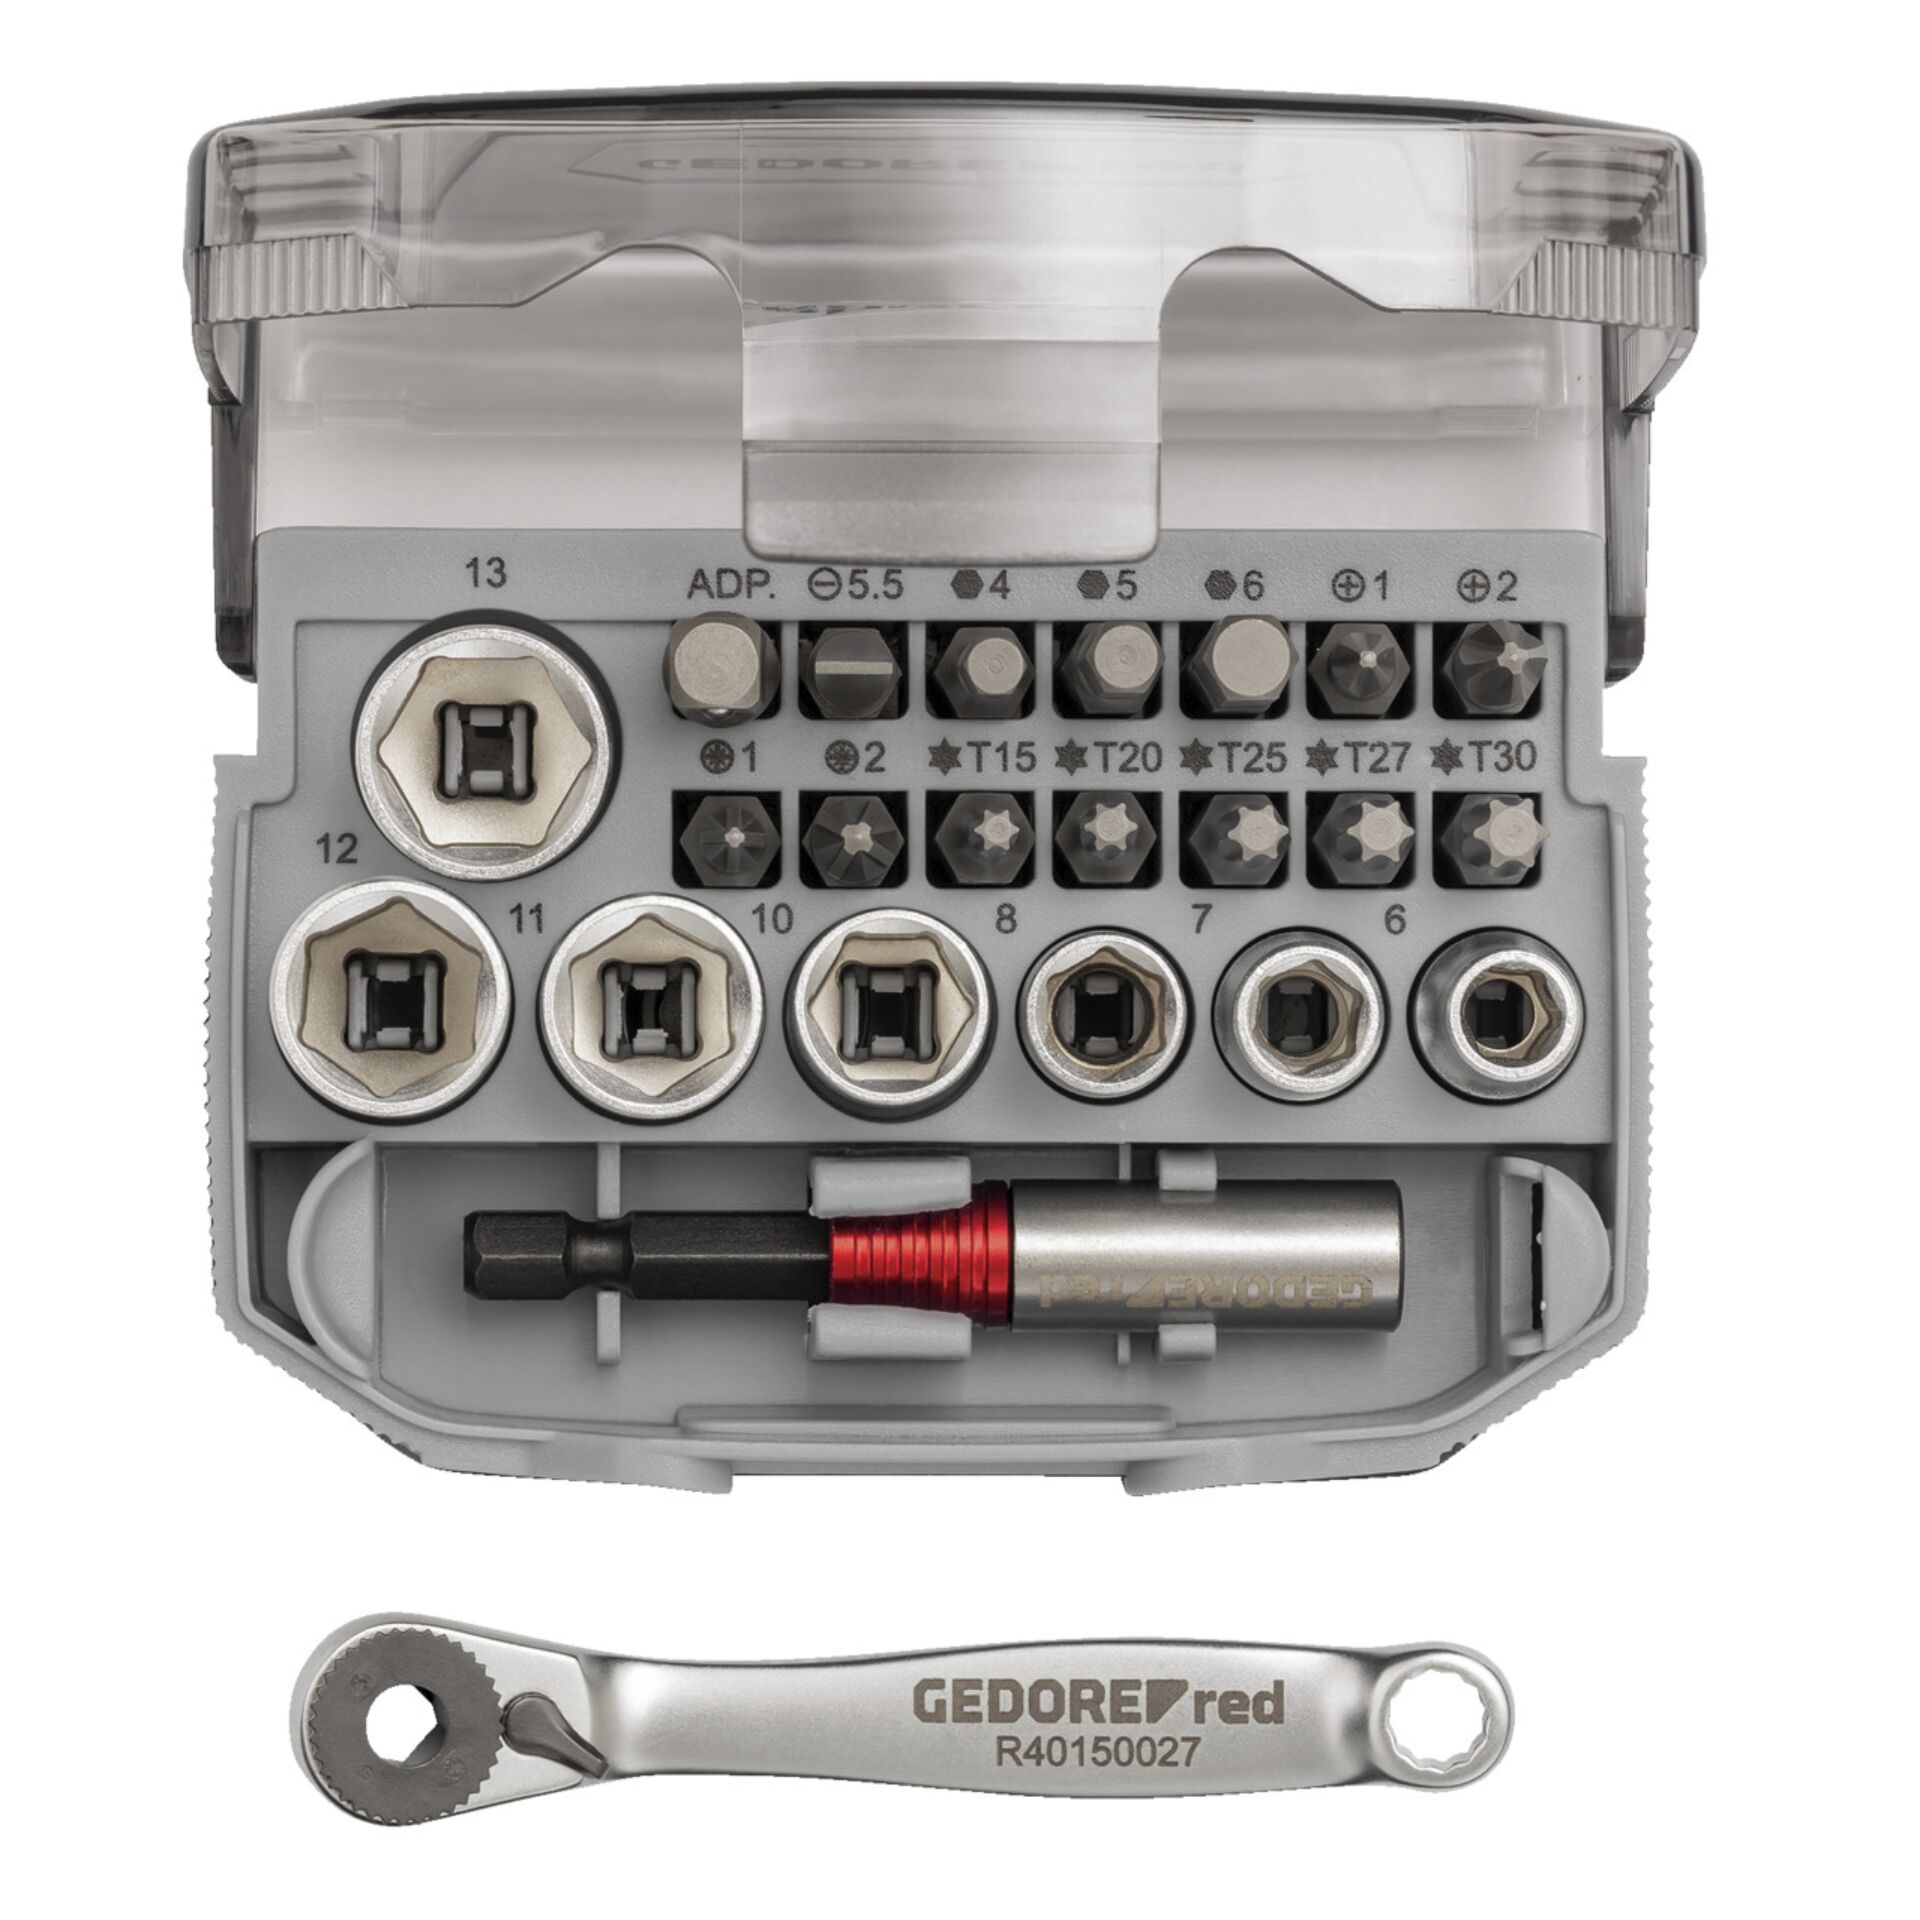 GEDORE red Socket Set 1/4 23-pieces